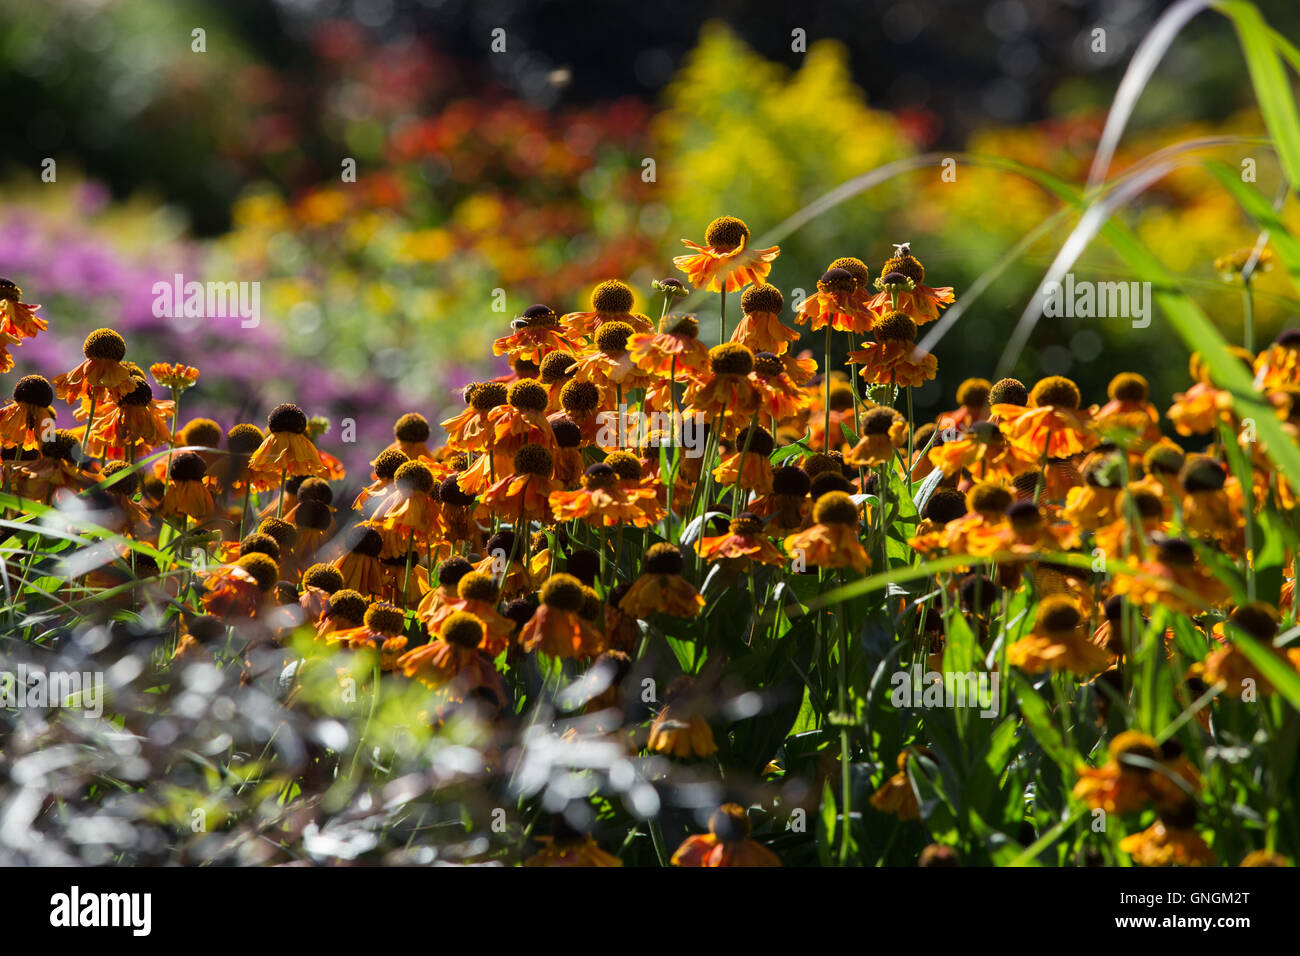 Cheerful Helenium flowers bring bright colours to a garden inj late summer and autumn Stock Photo